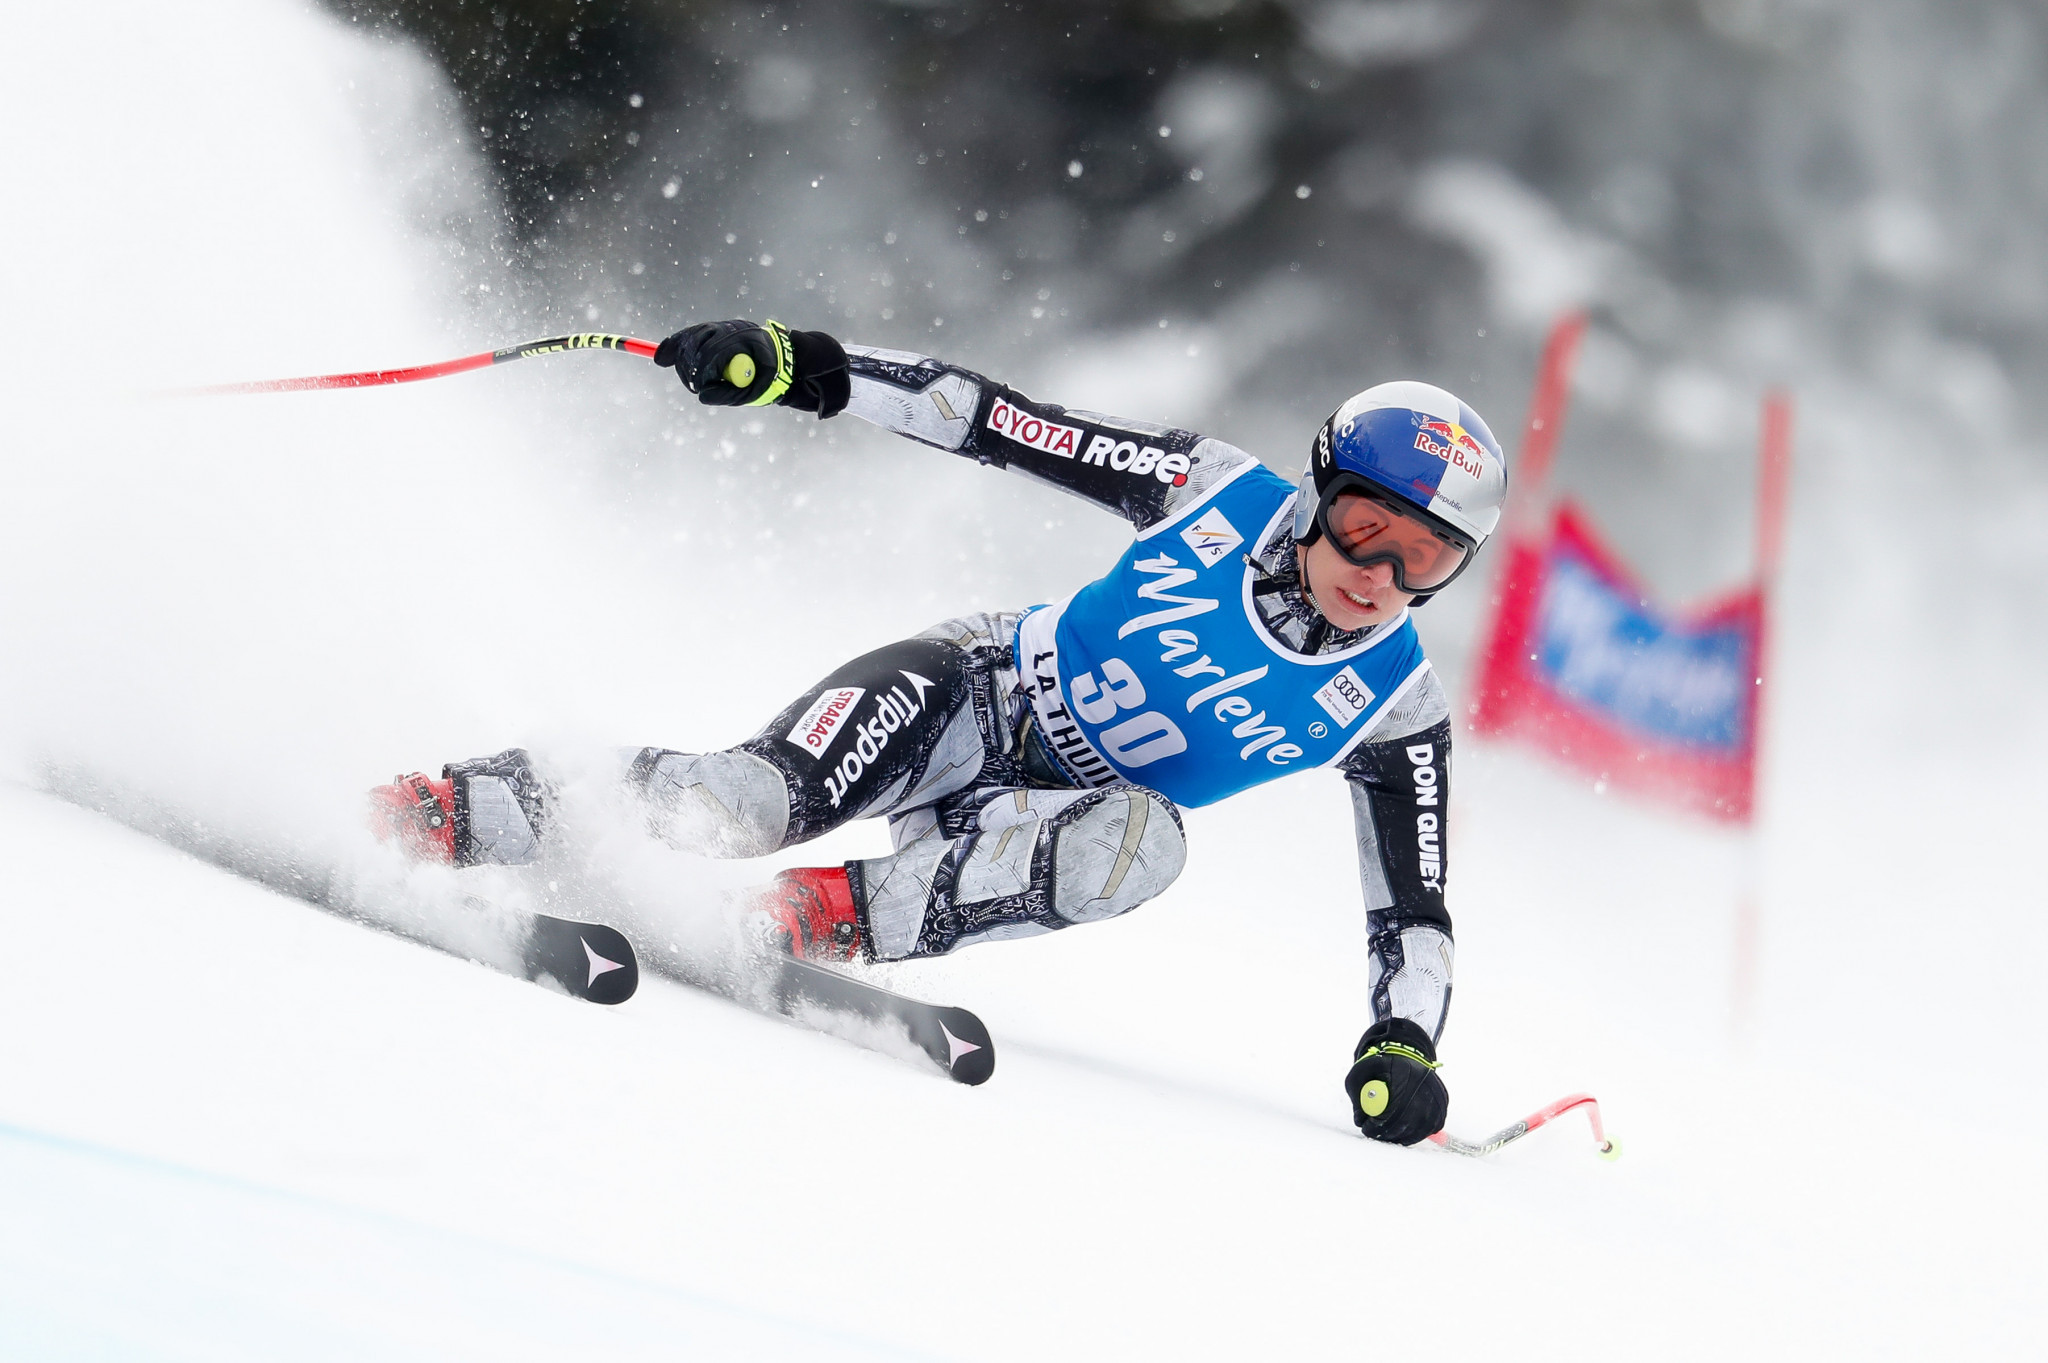 Ledecka named Czech winter sports athlete of the year for fourth time